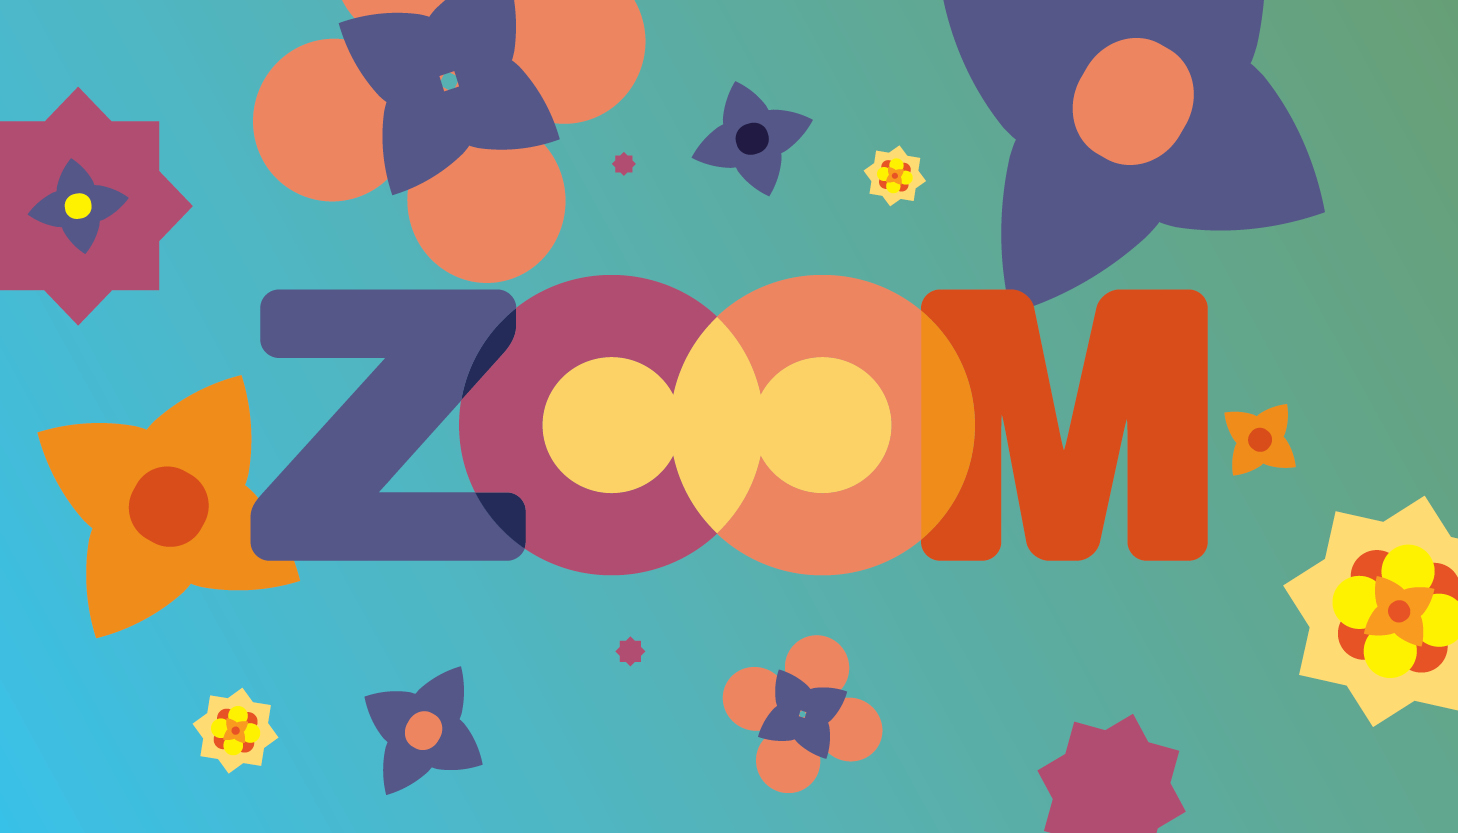 Zoom Family Film and Book Festival logo; the word “ZOOM” is in multi-colored font against a blueish green background filled with multi-colored flower and star shapes.